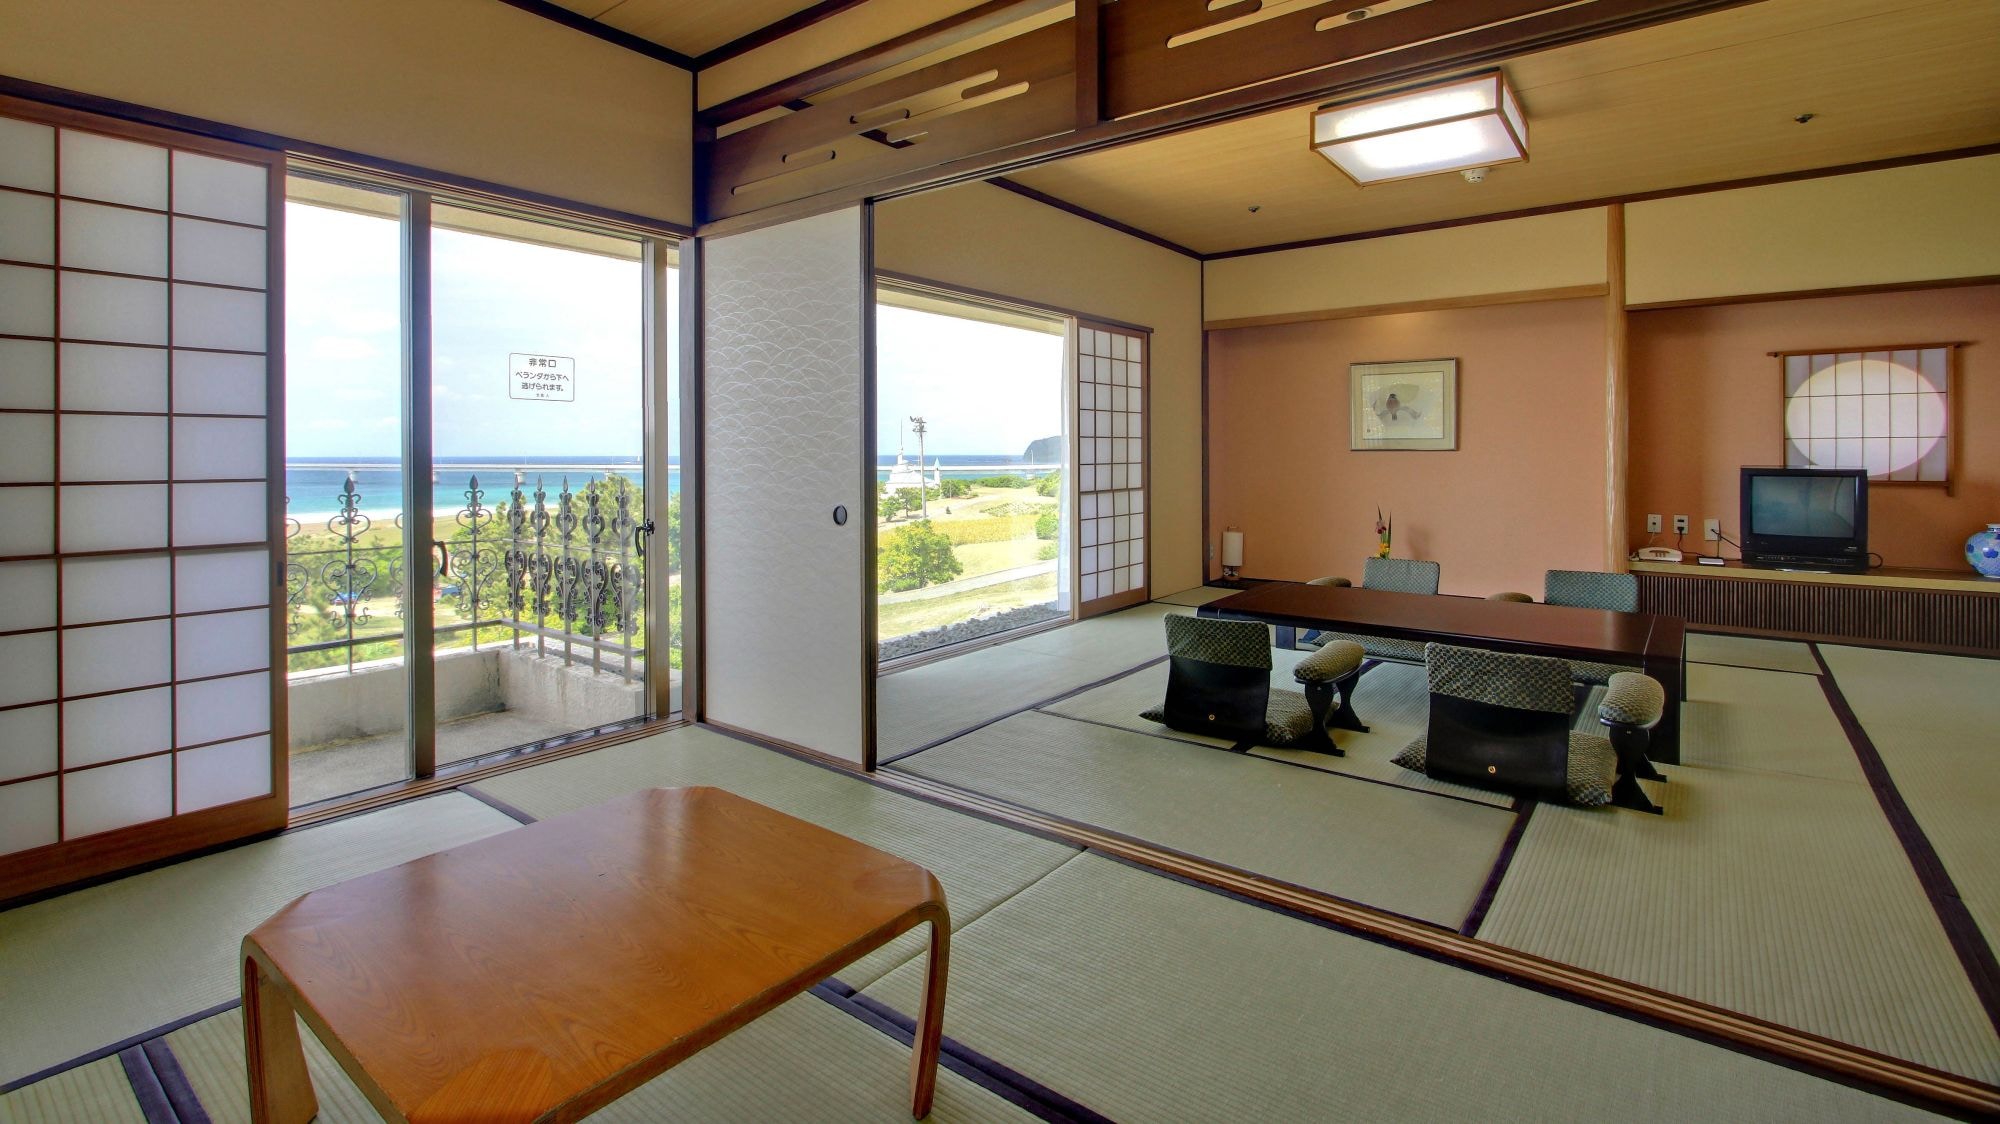 An example of a special Japanese-style room